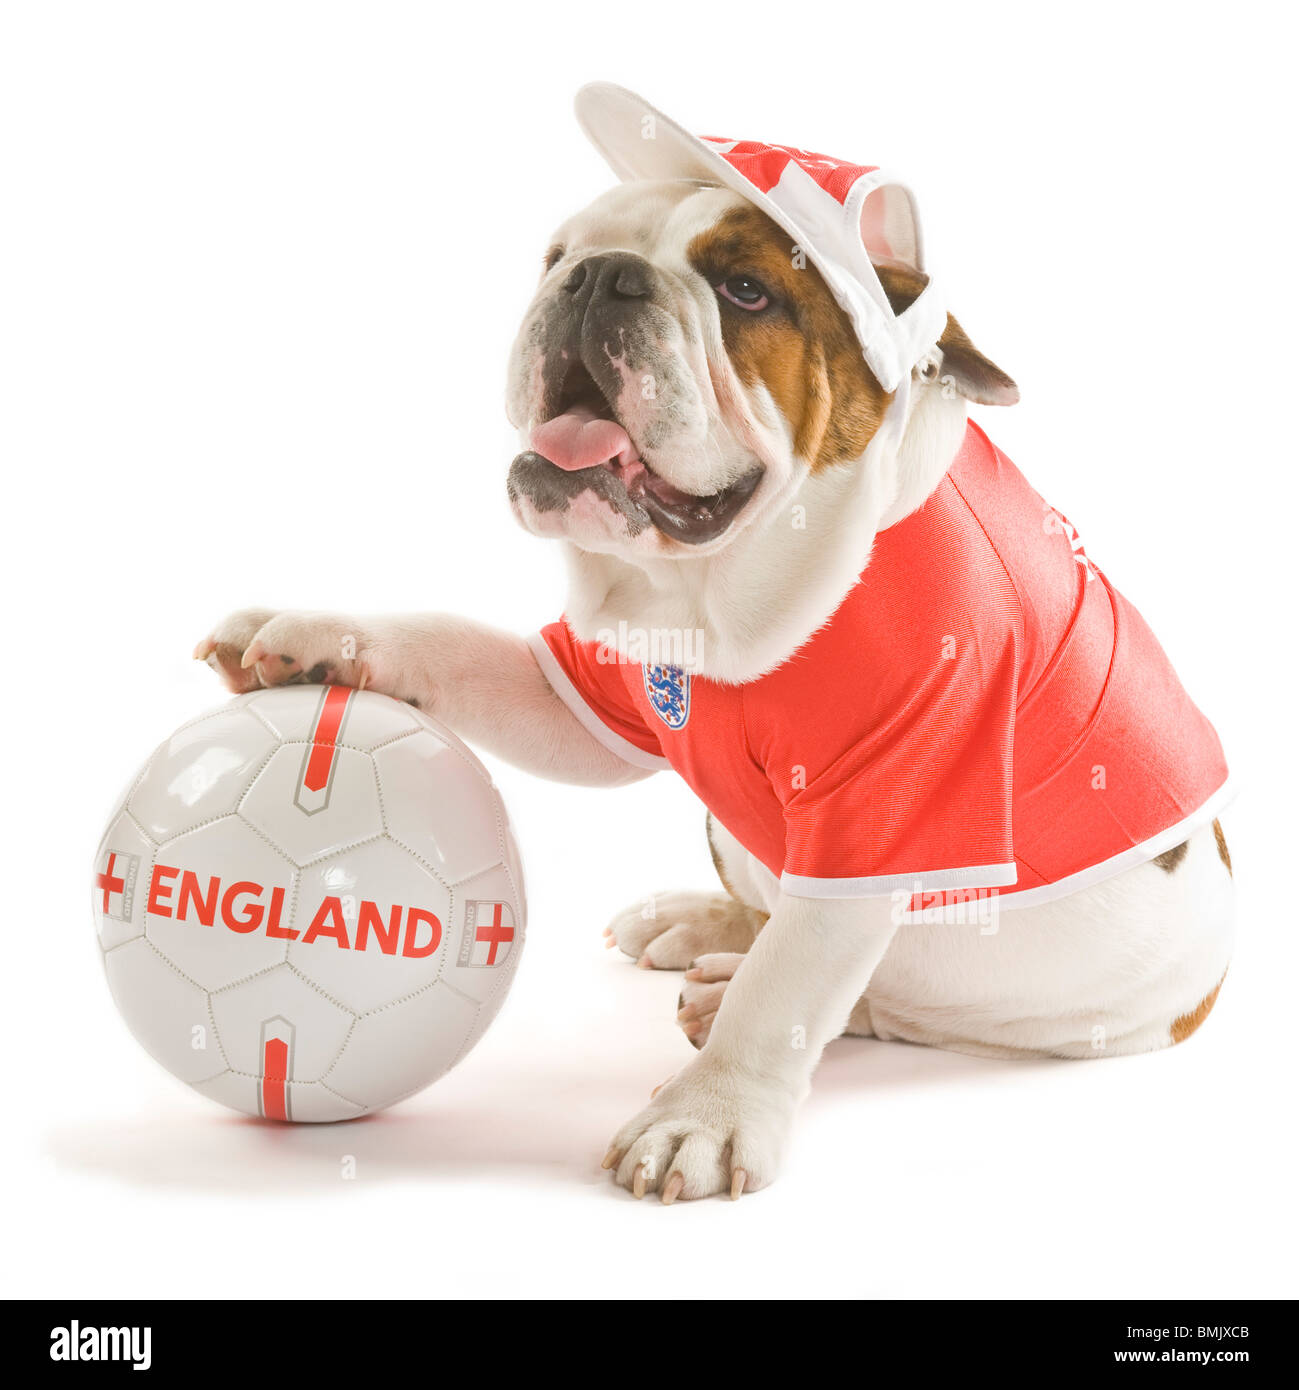 A British Bulldog with a football while wearing an England team football shirt and cap against a white background. Stock Photo